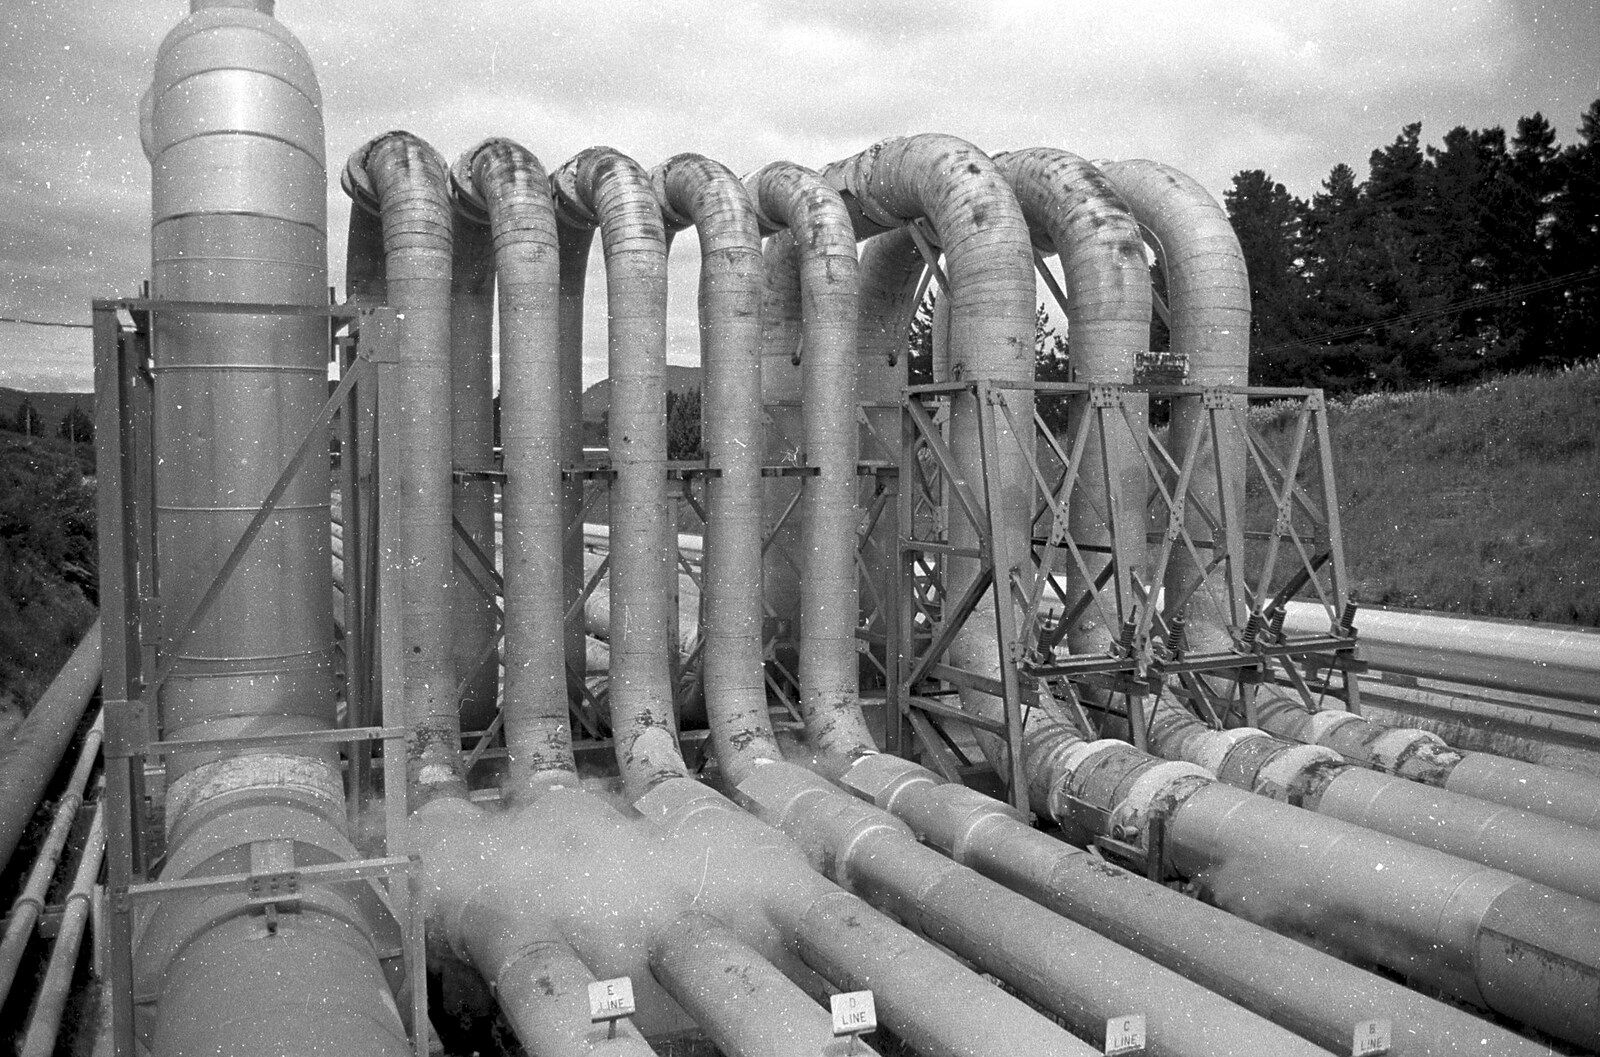 Geothermal pipe work from A Road-trip Through Rotorua to Palmerston, North Island, New Zealand - 27th November 1992